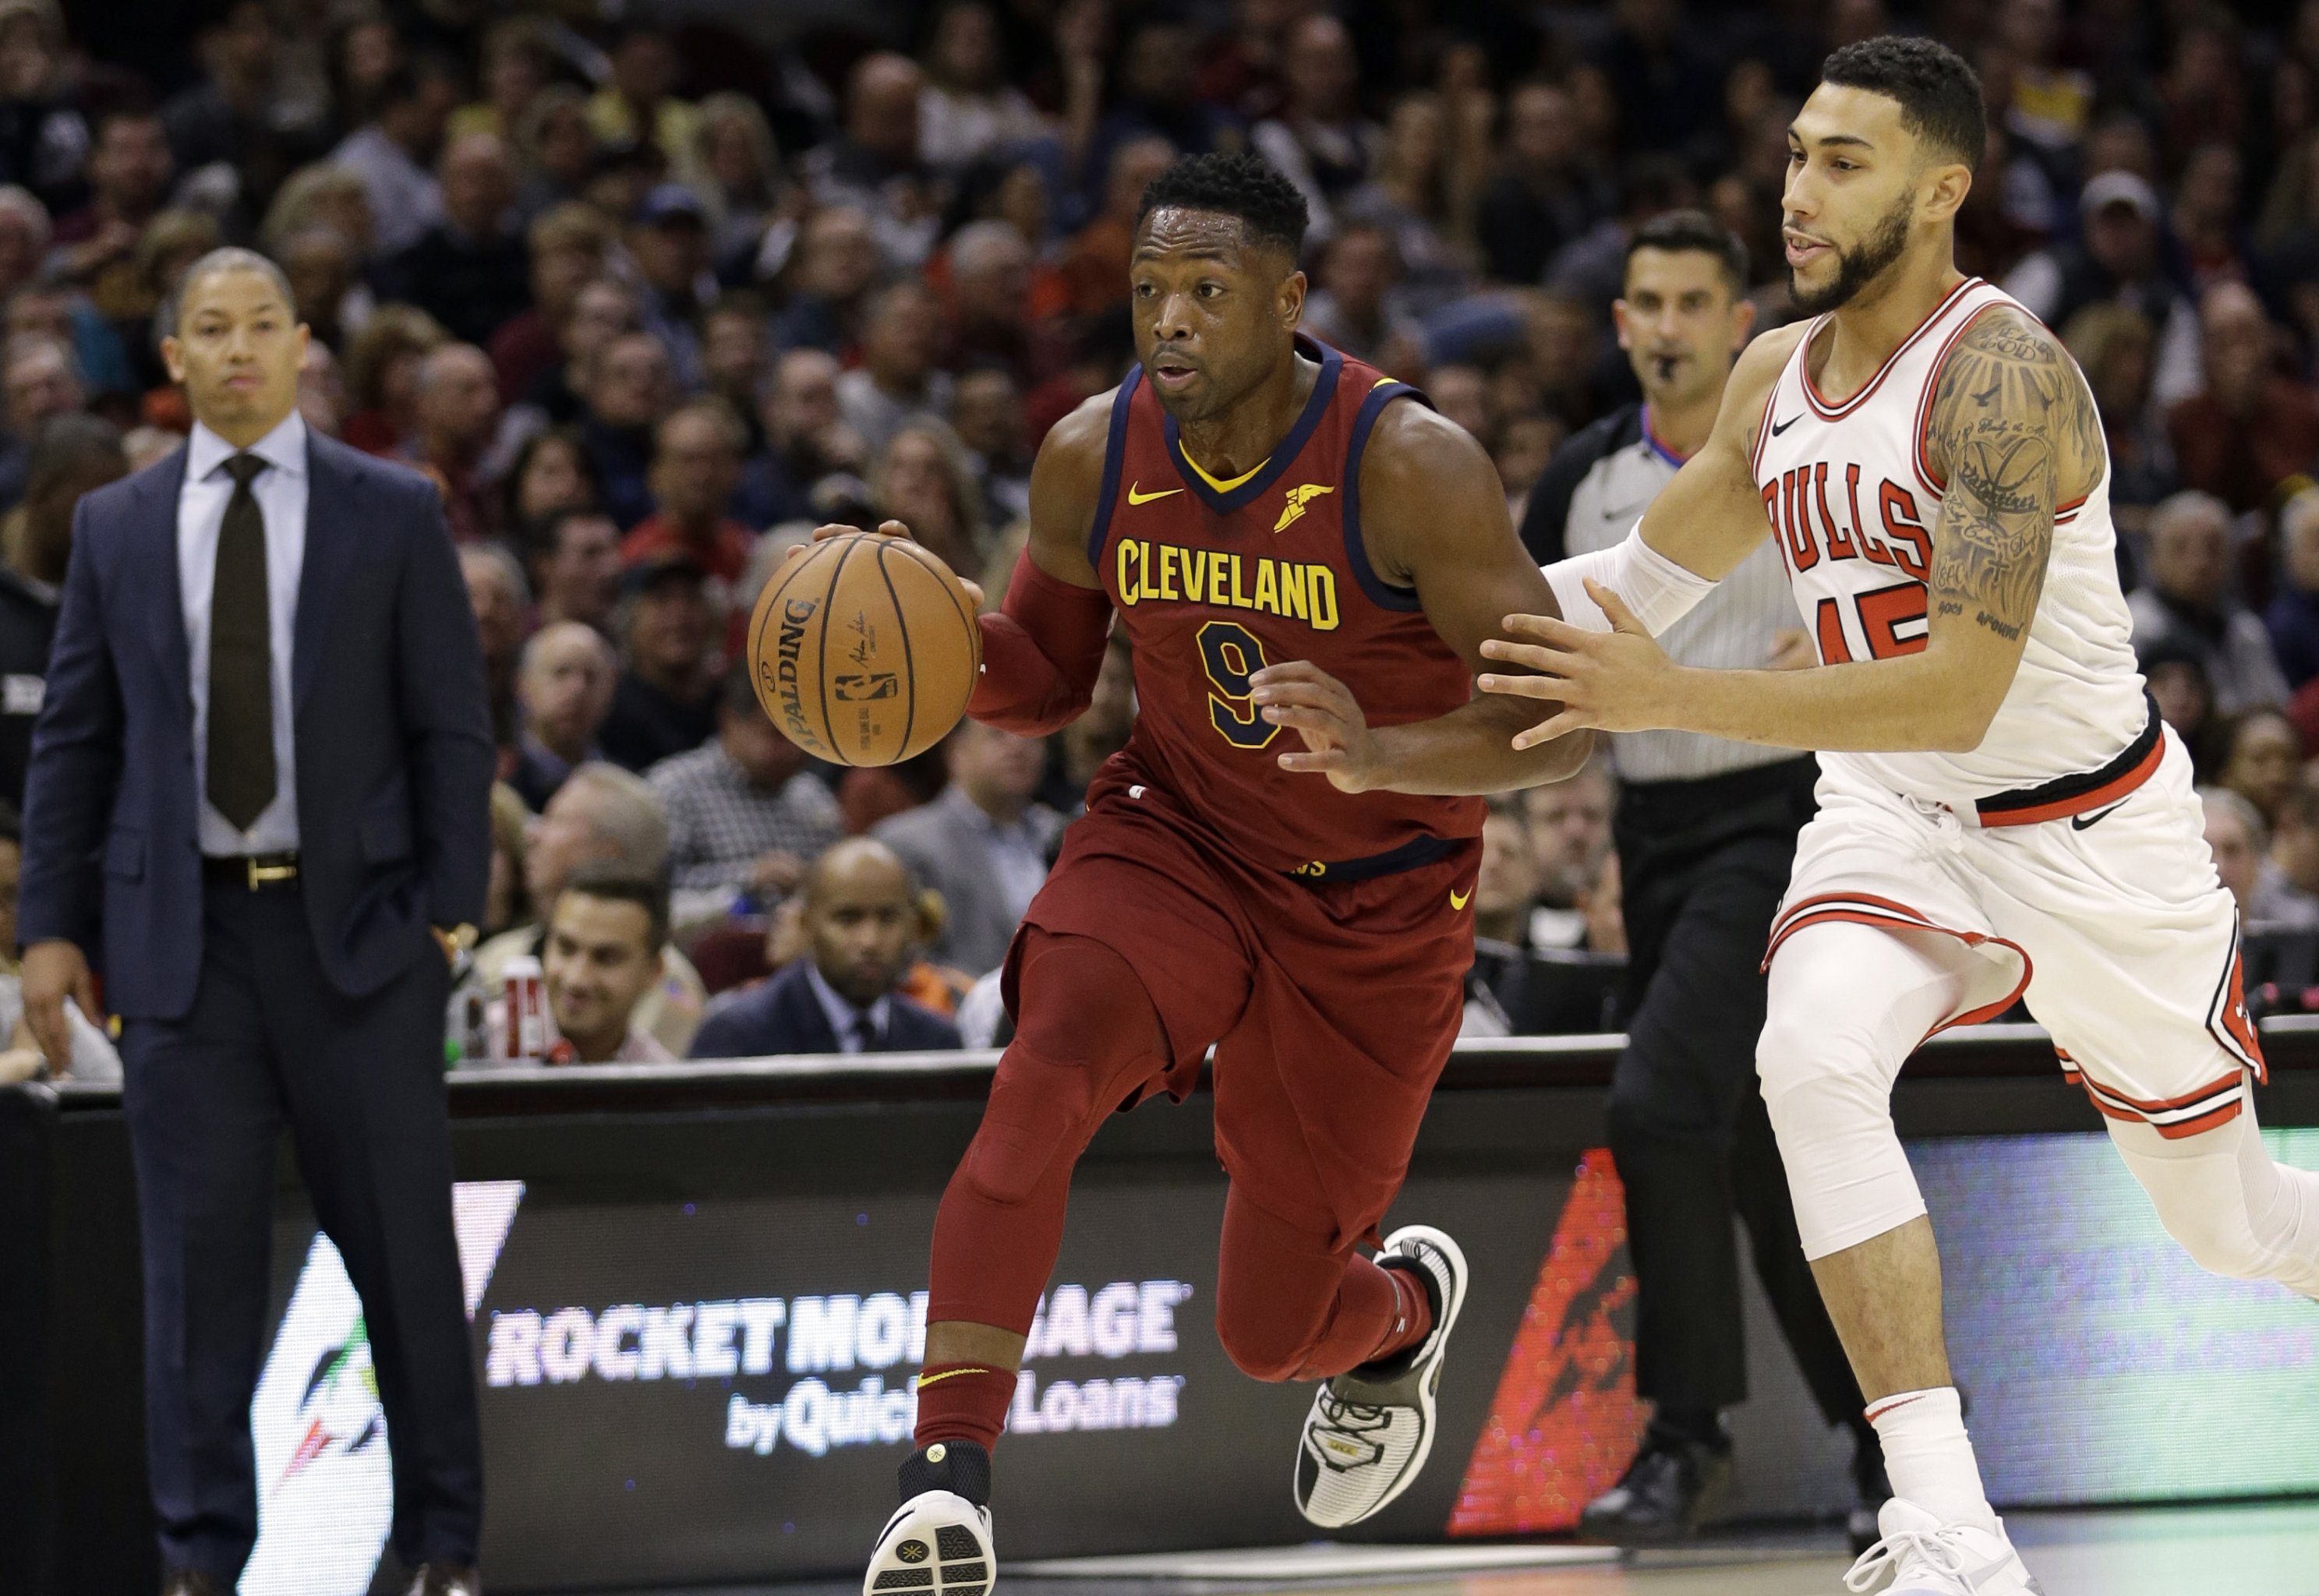 After introspection, Dwyane Wade thrives in bench role for Cavaliers.